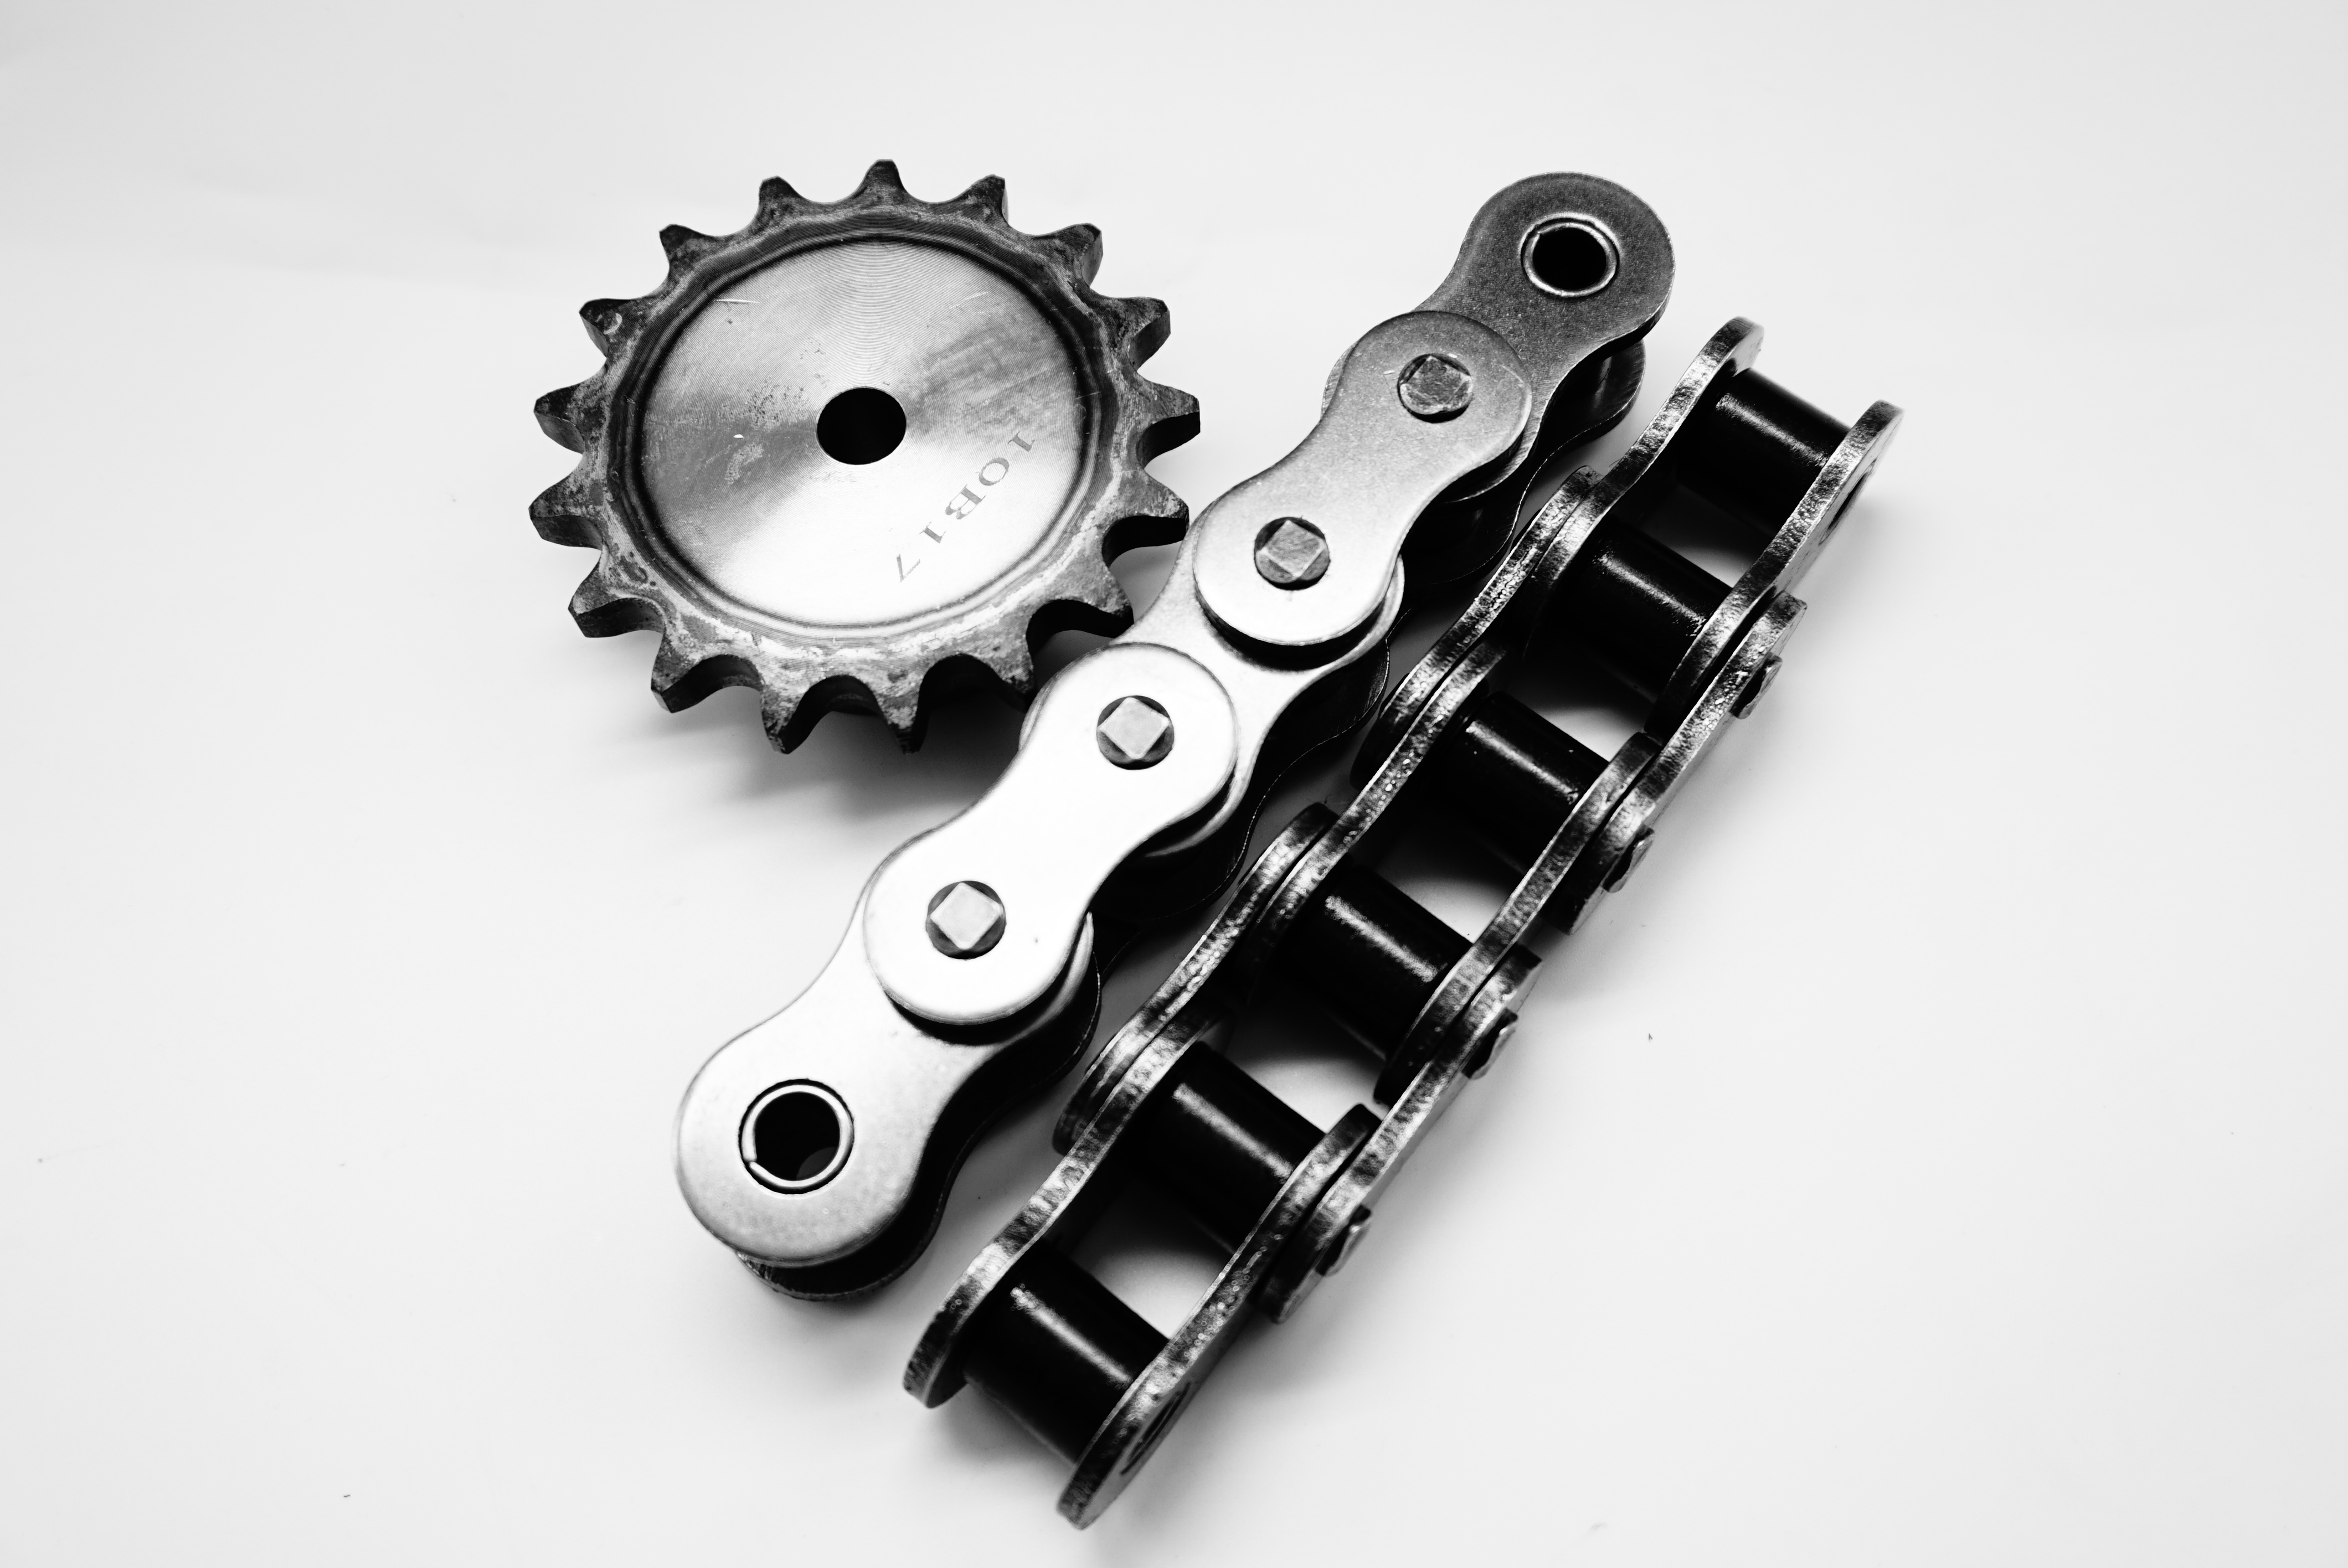 What is the difference between bicycle chain oil and motorcycle chain oil?